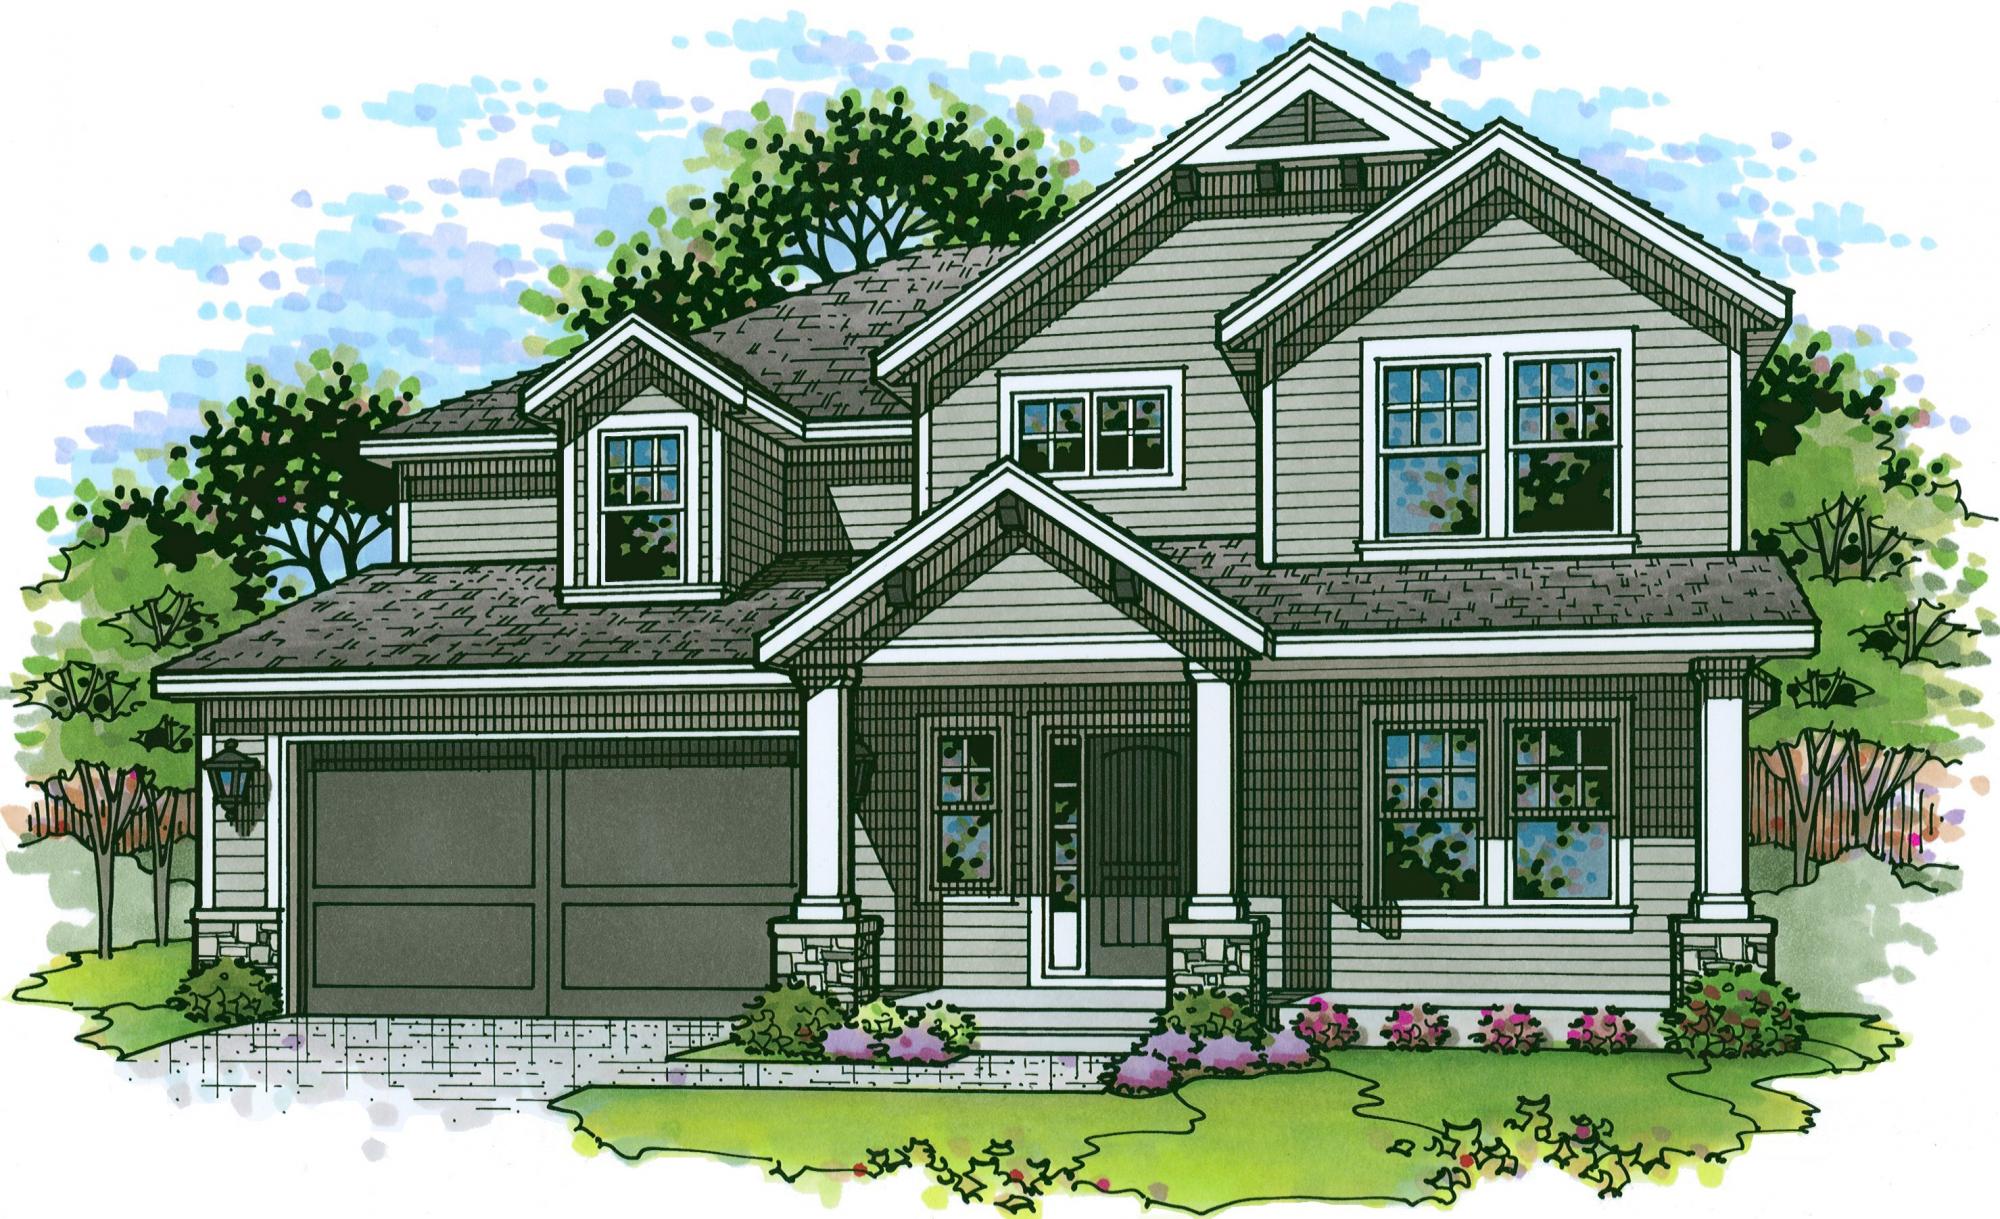 Color rendering of the clover model from lambie custom homes